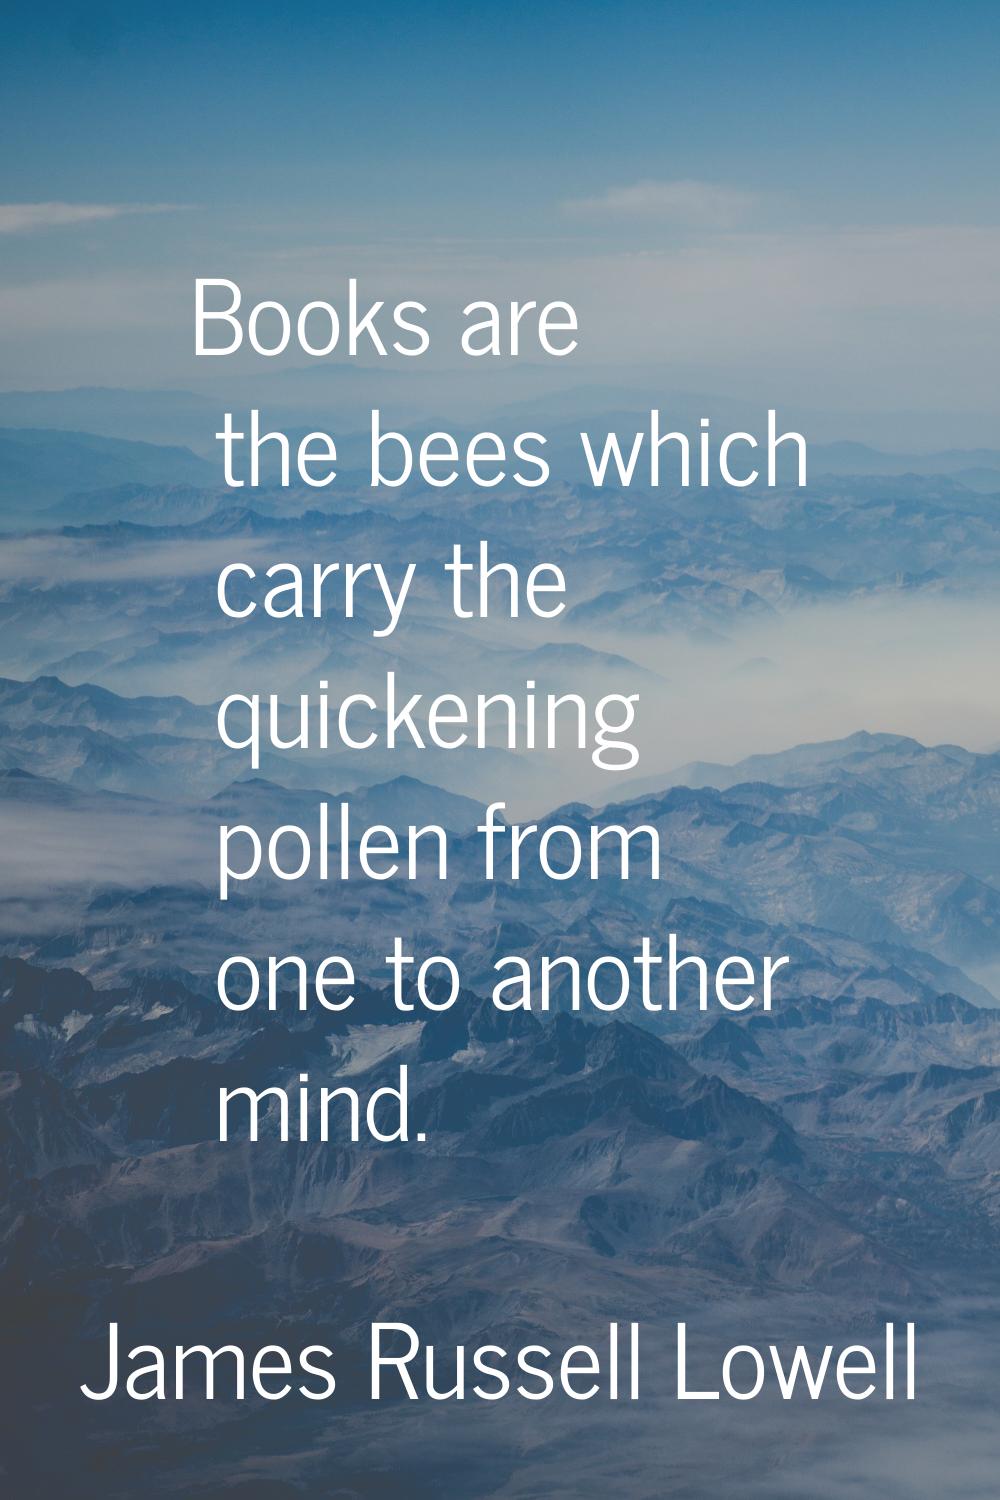 Books are the bees which carry the quickening pollen from one to another mind.